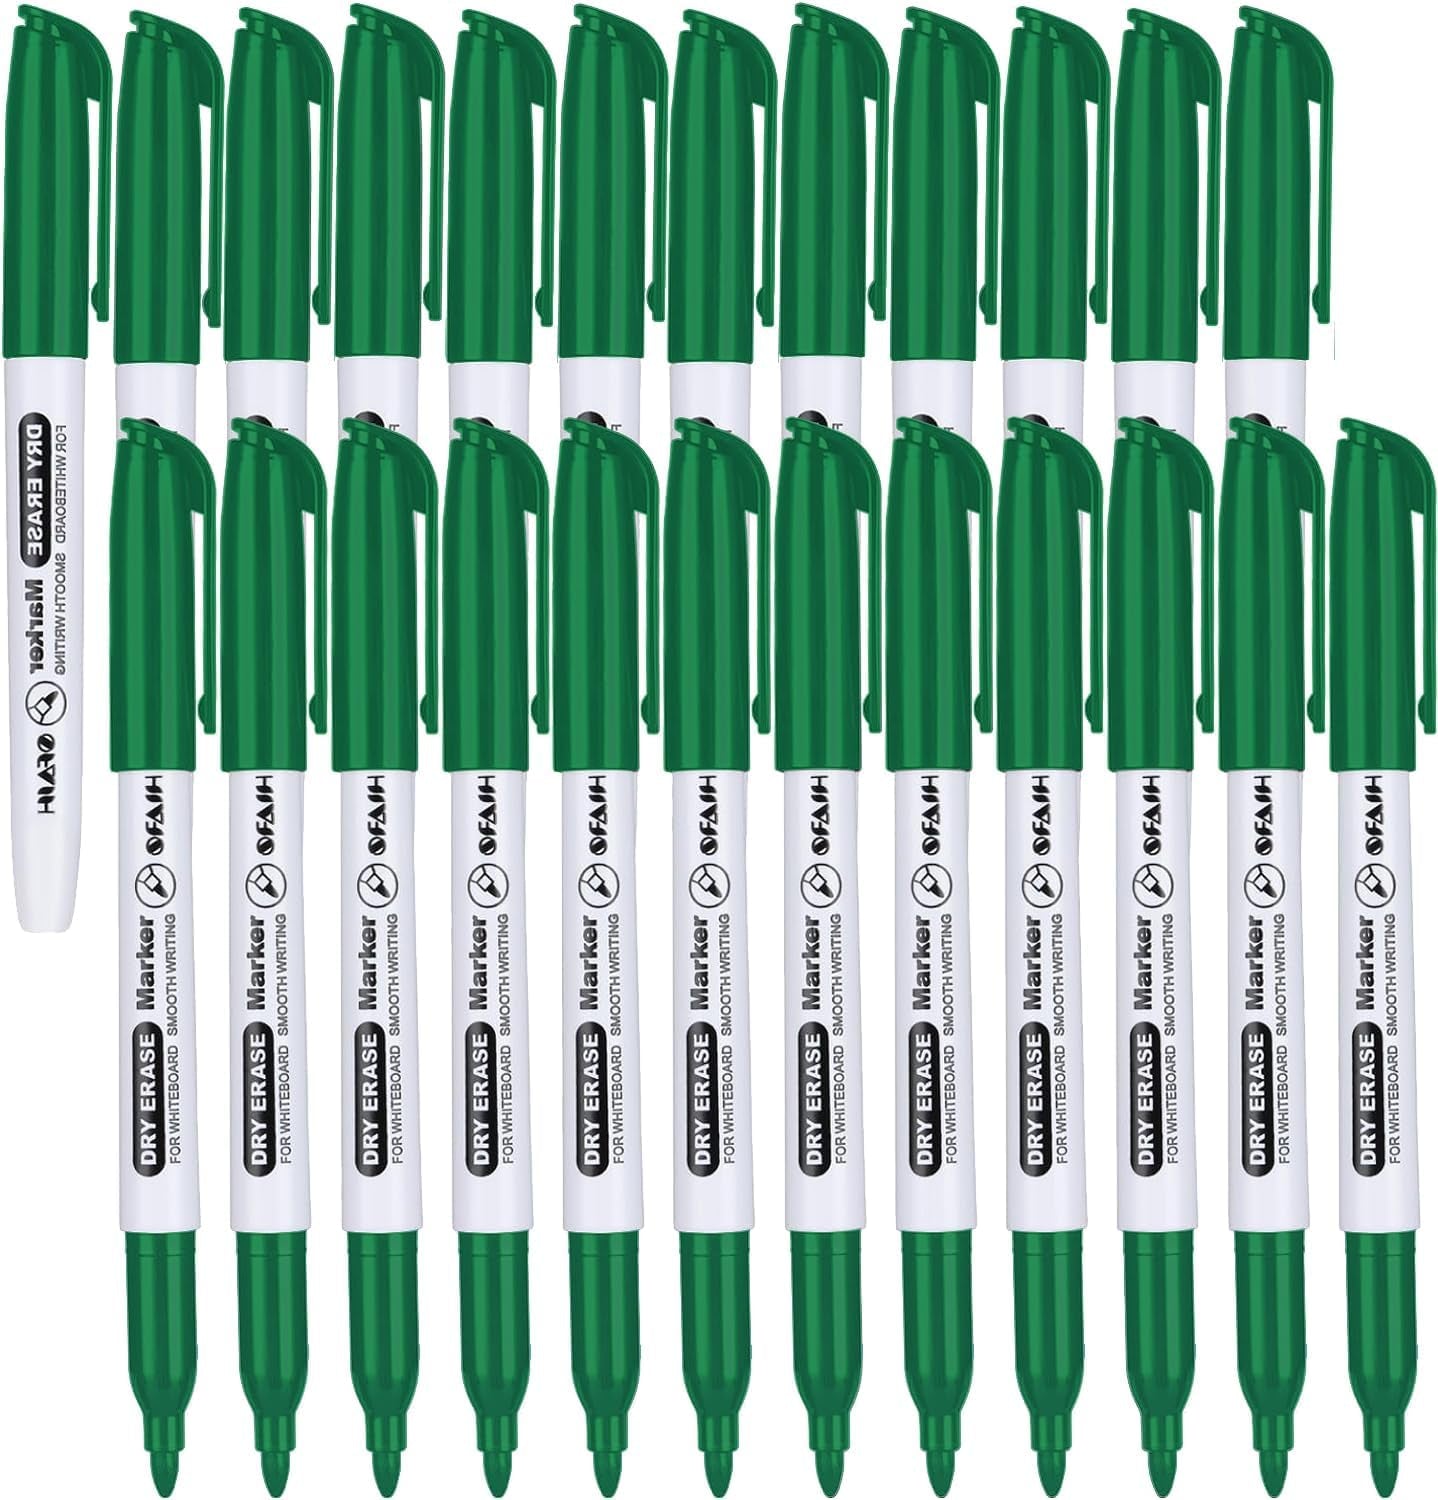 Fine Tip Dry Erase Markers - 24 Pack Black Whiteboard Erasable Markers Bulk for Kids Adults, Ideal for Classroom School Office Home Use on White Board, Non-Toxic Easy Clean